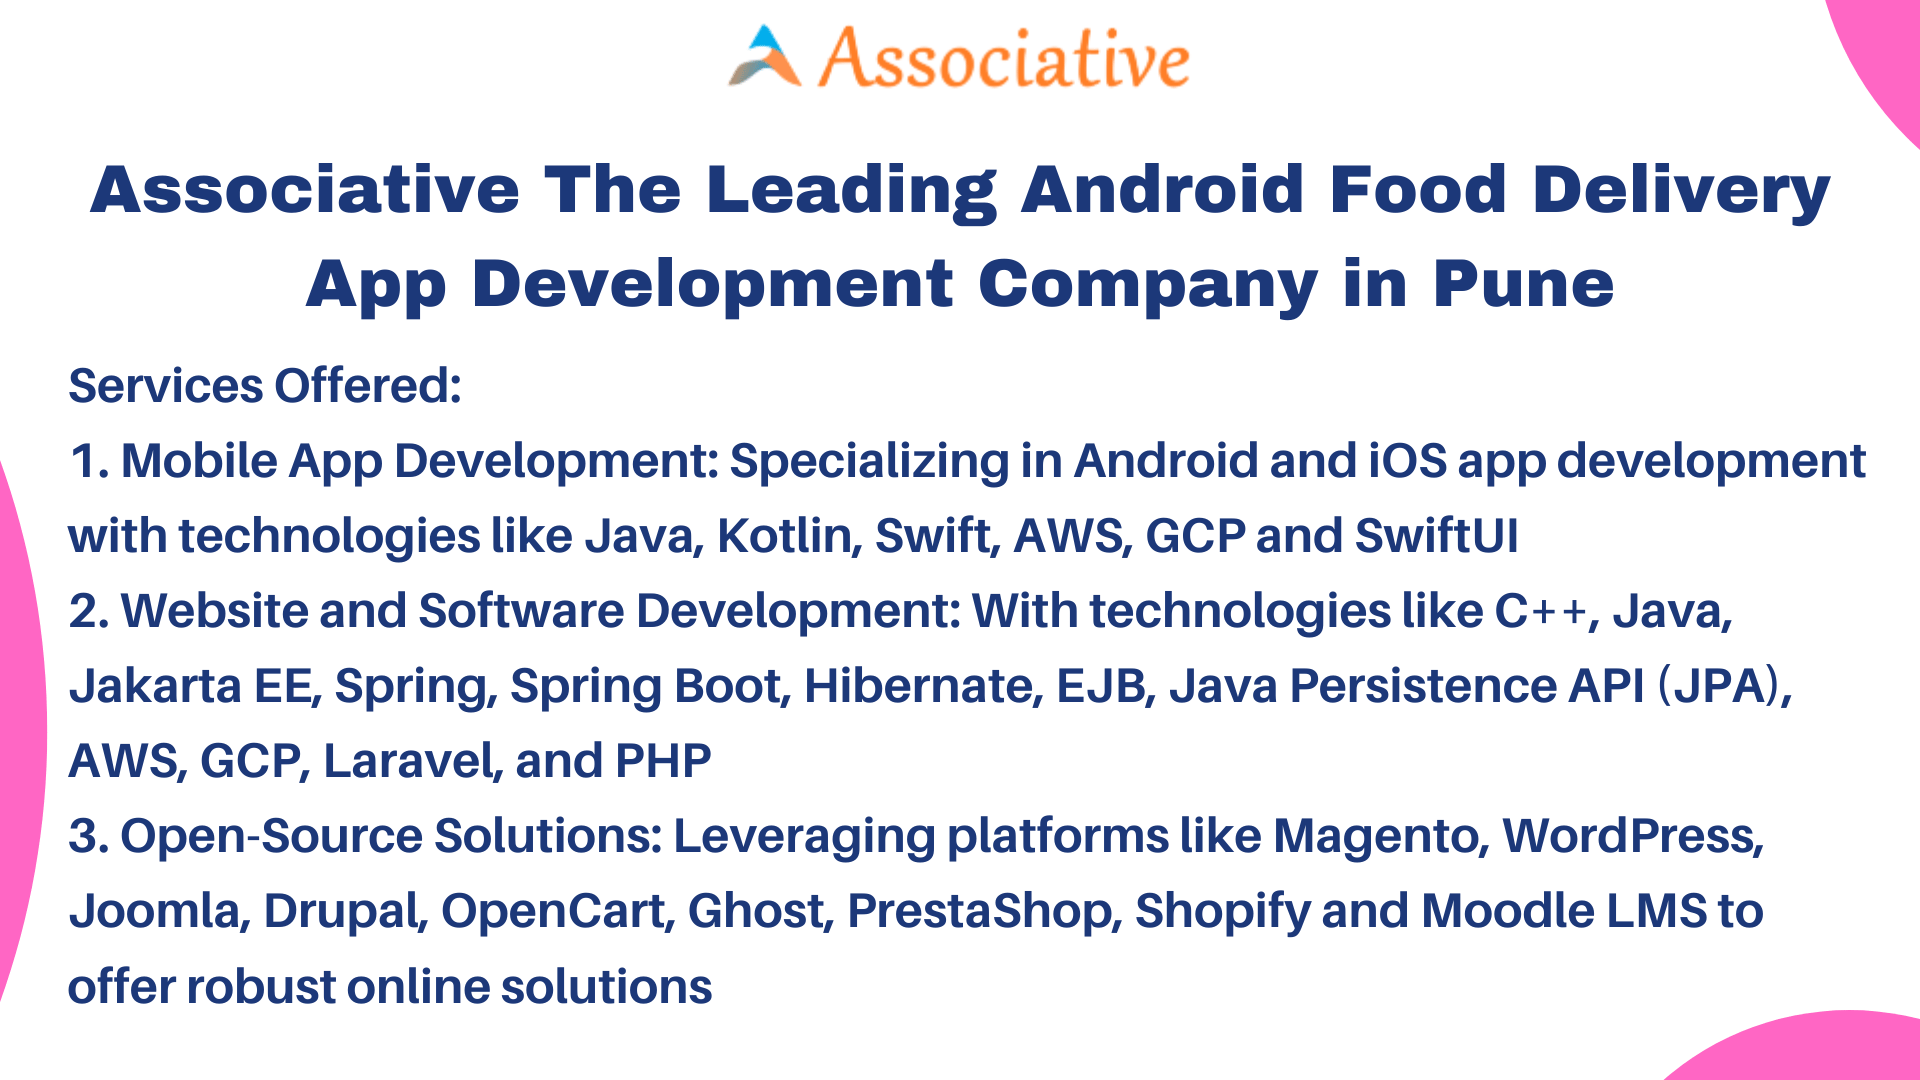 Associative The Leading Android Food Delivery App Development Company in Pune